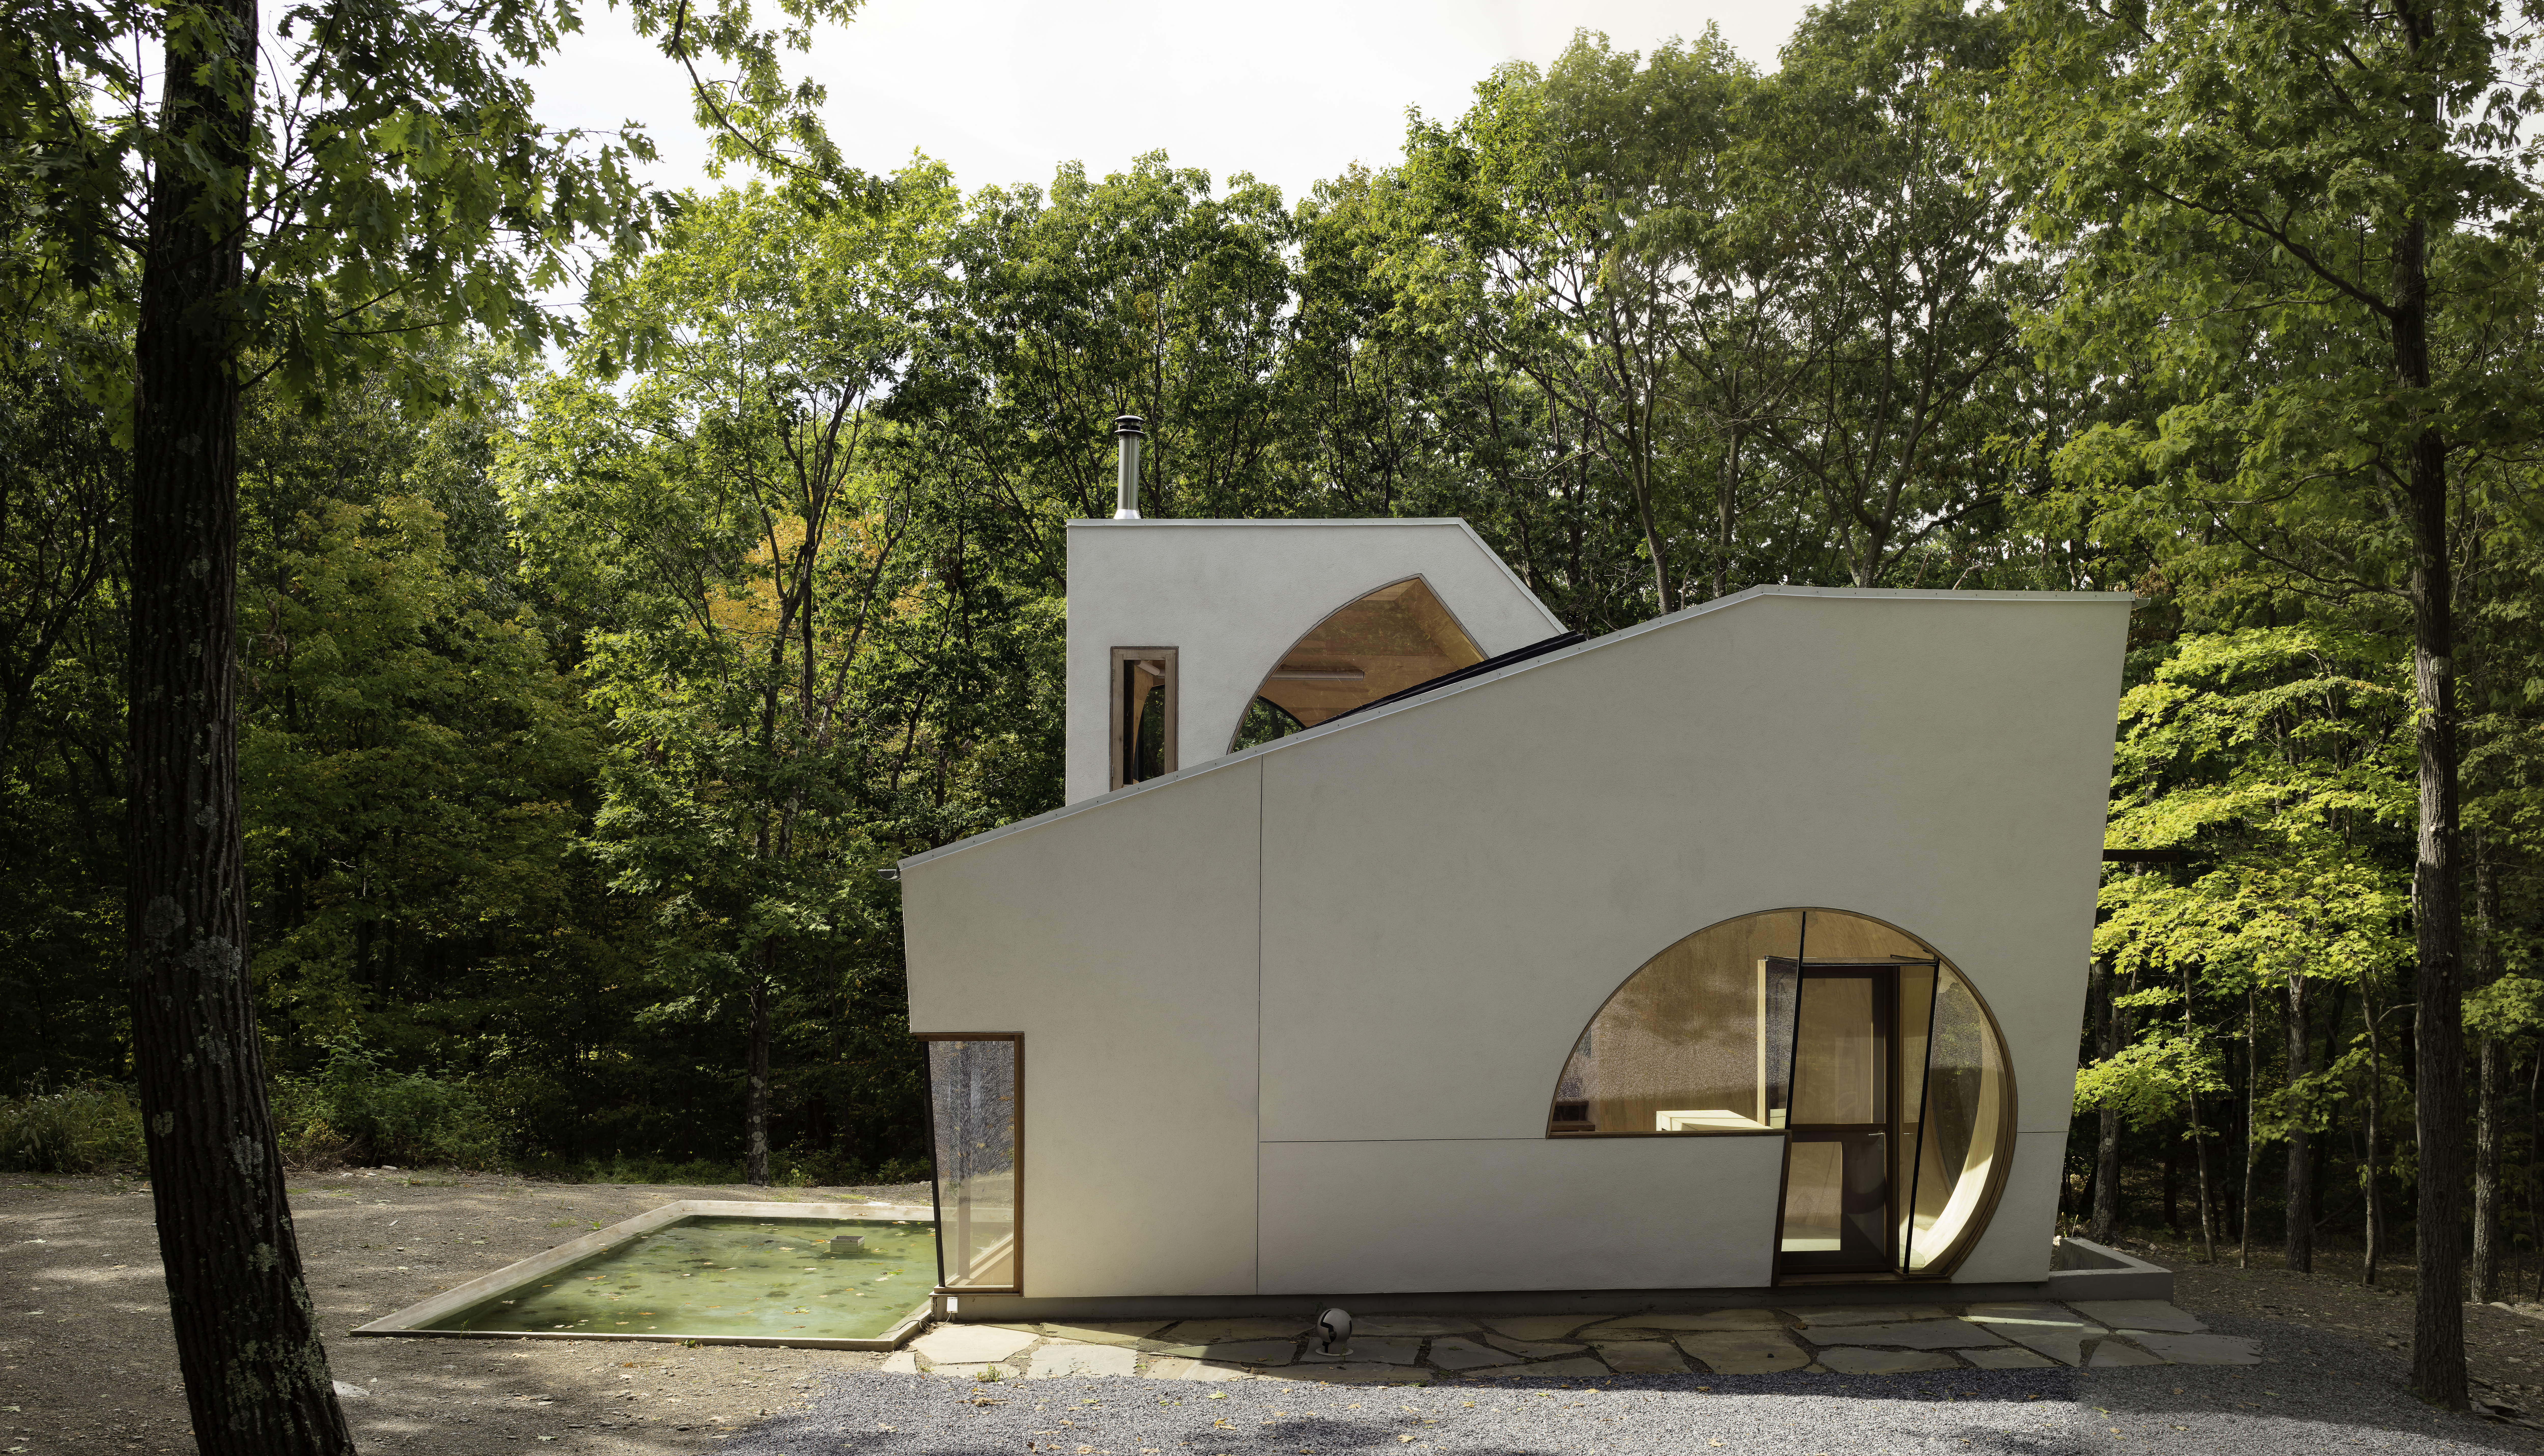 A Creative Take on Space and Light from Steven Holl Architects